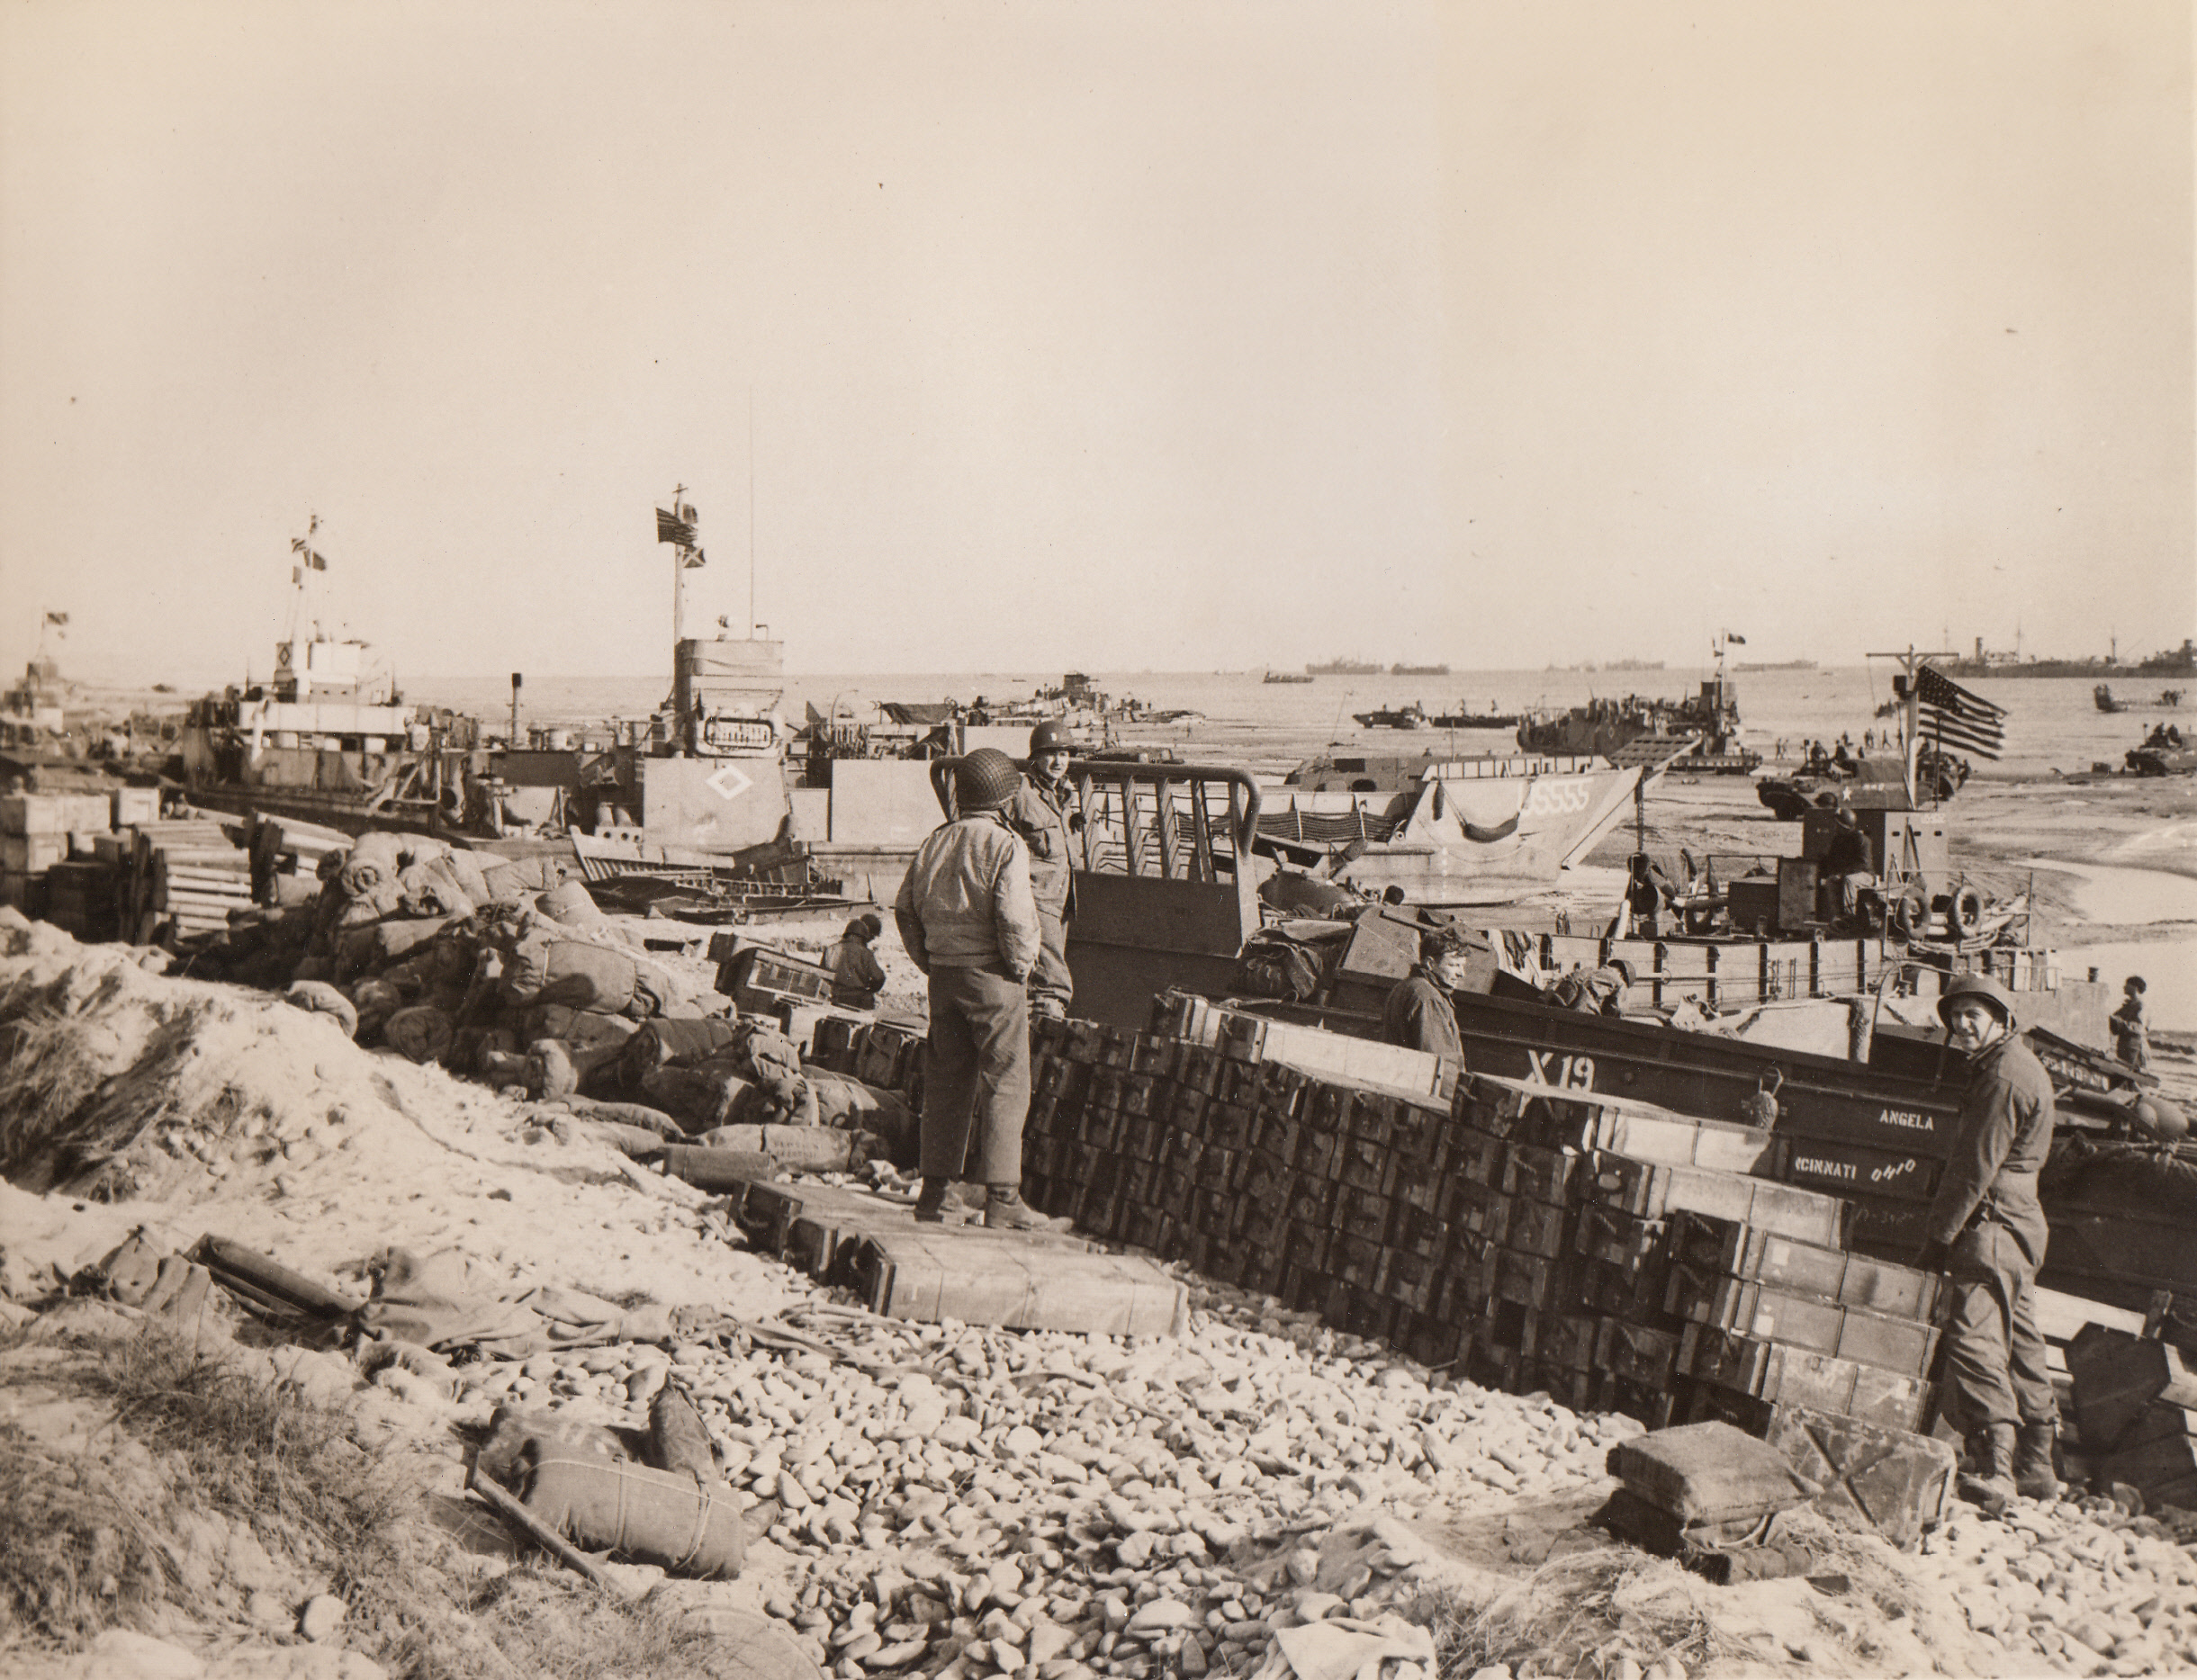 Supplies, Supplies, Supplies, 6/15/1944. France – There’s scarcely an inch of beachhead space that doesn’t hold some sort of equipment for fighting men, as the endless chain of supplies streams across the Channel to our soldiers in France. Fighting men check the vast amount of food and weapons dumped on this Normandy beach.;